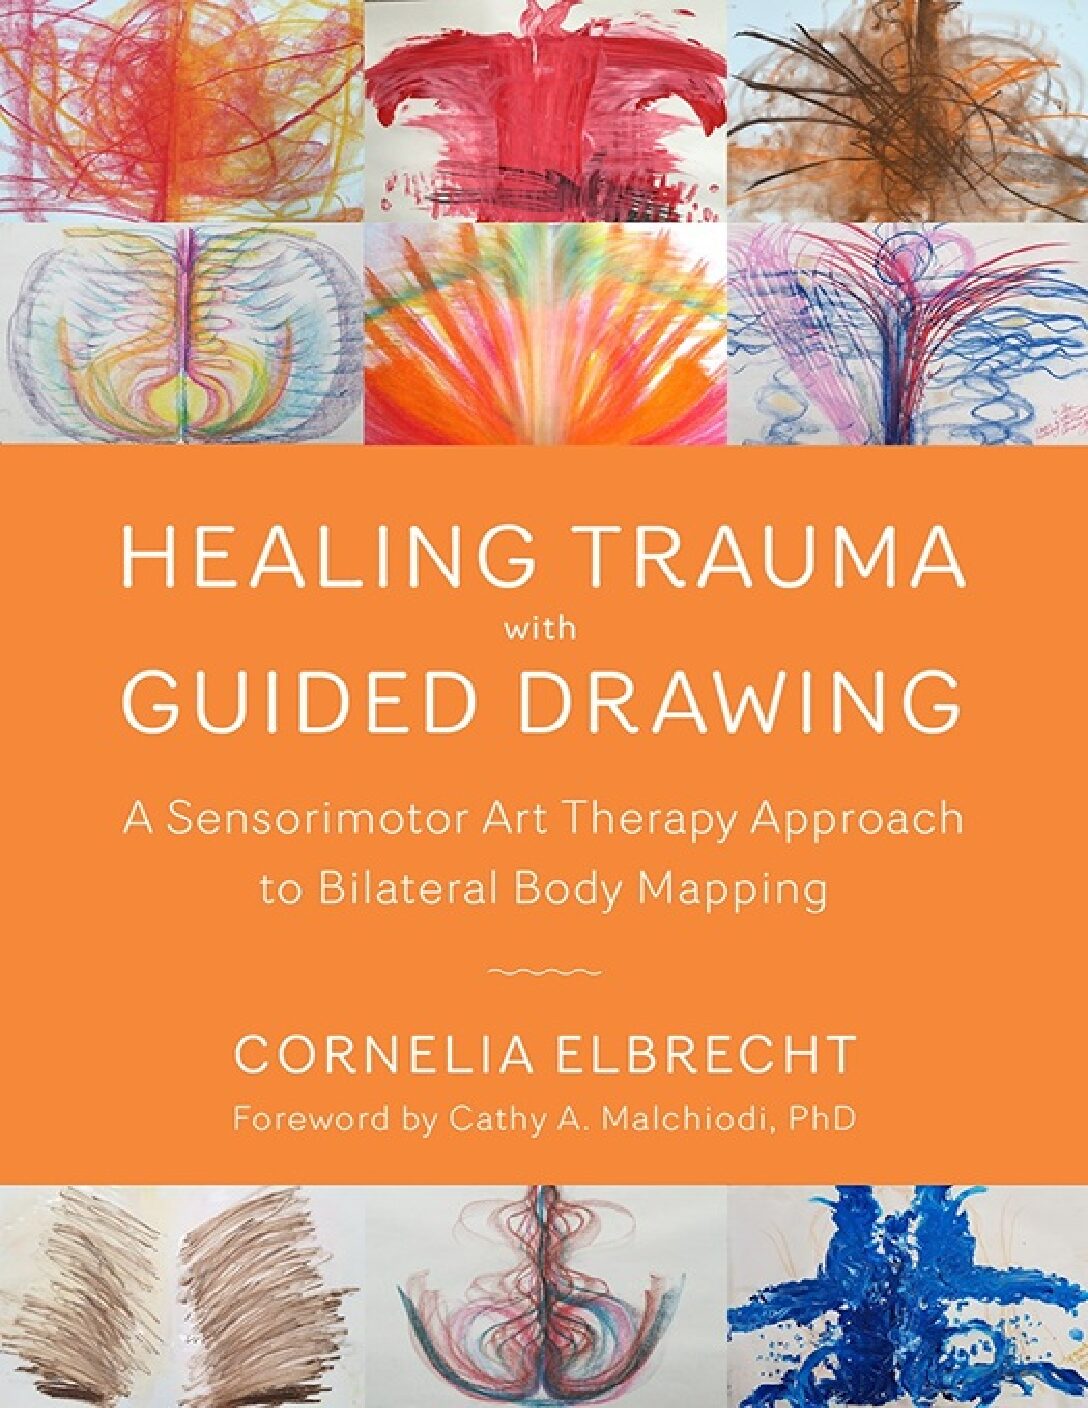 Healing Trauma with Guided Drawing A Sensorimotor Art Therapy Approach